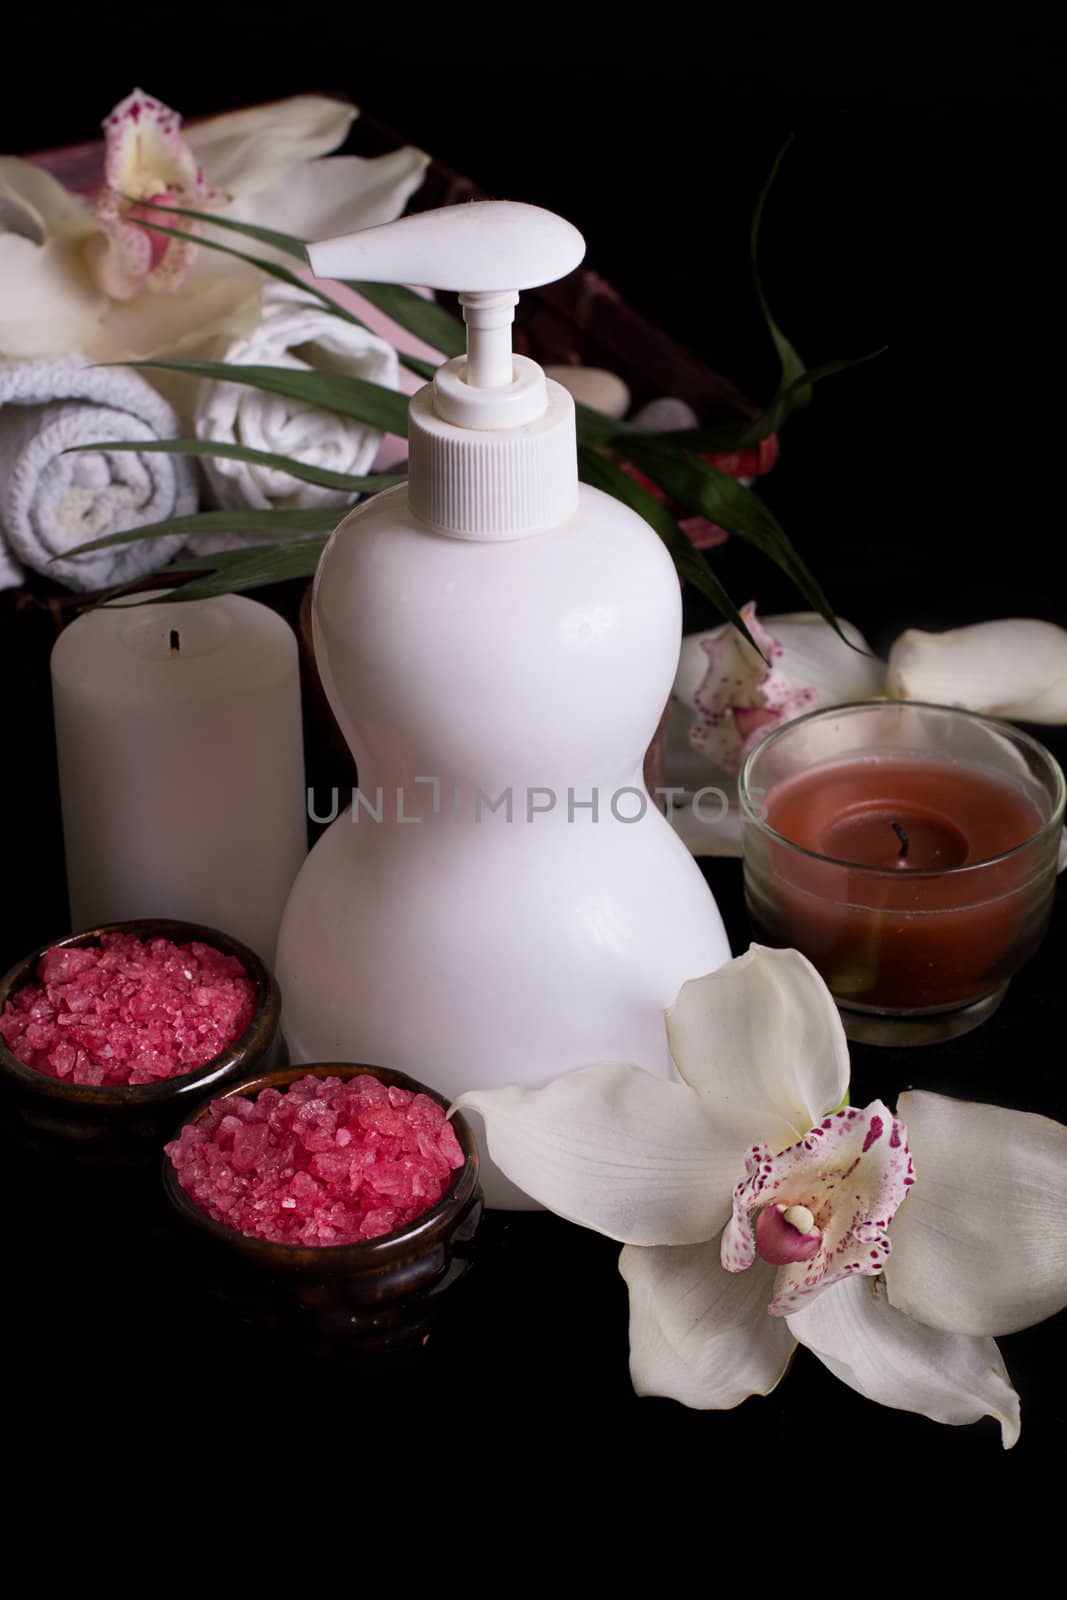 White orchids and spa treatment products by Angel_a